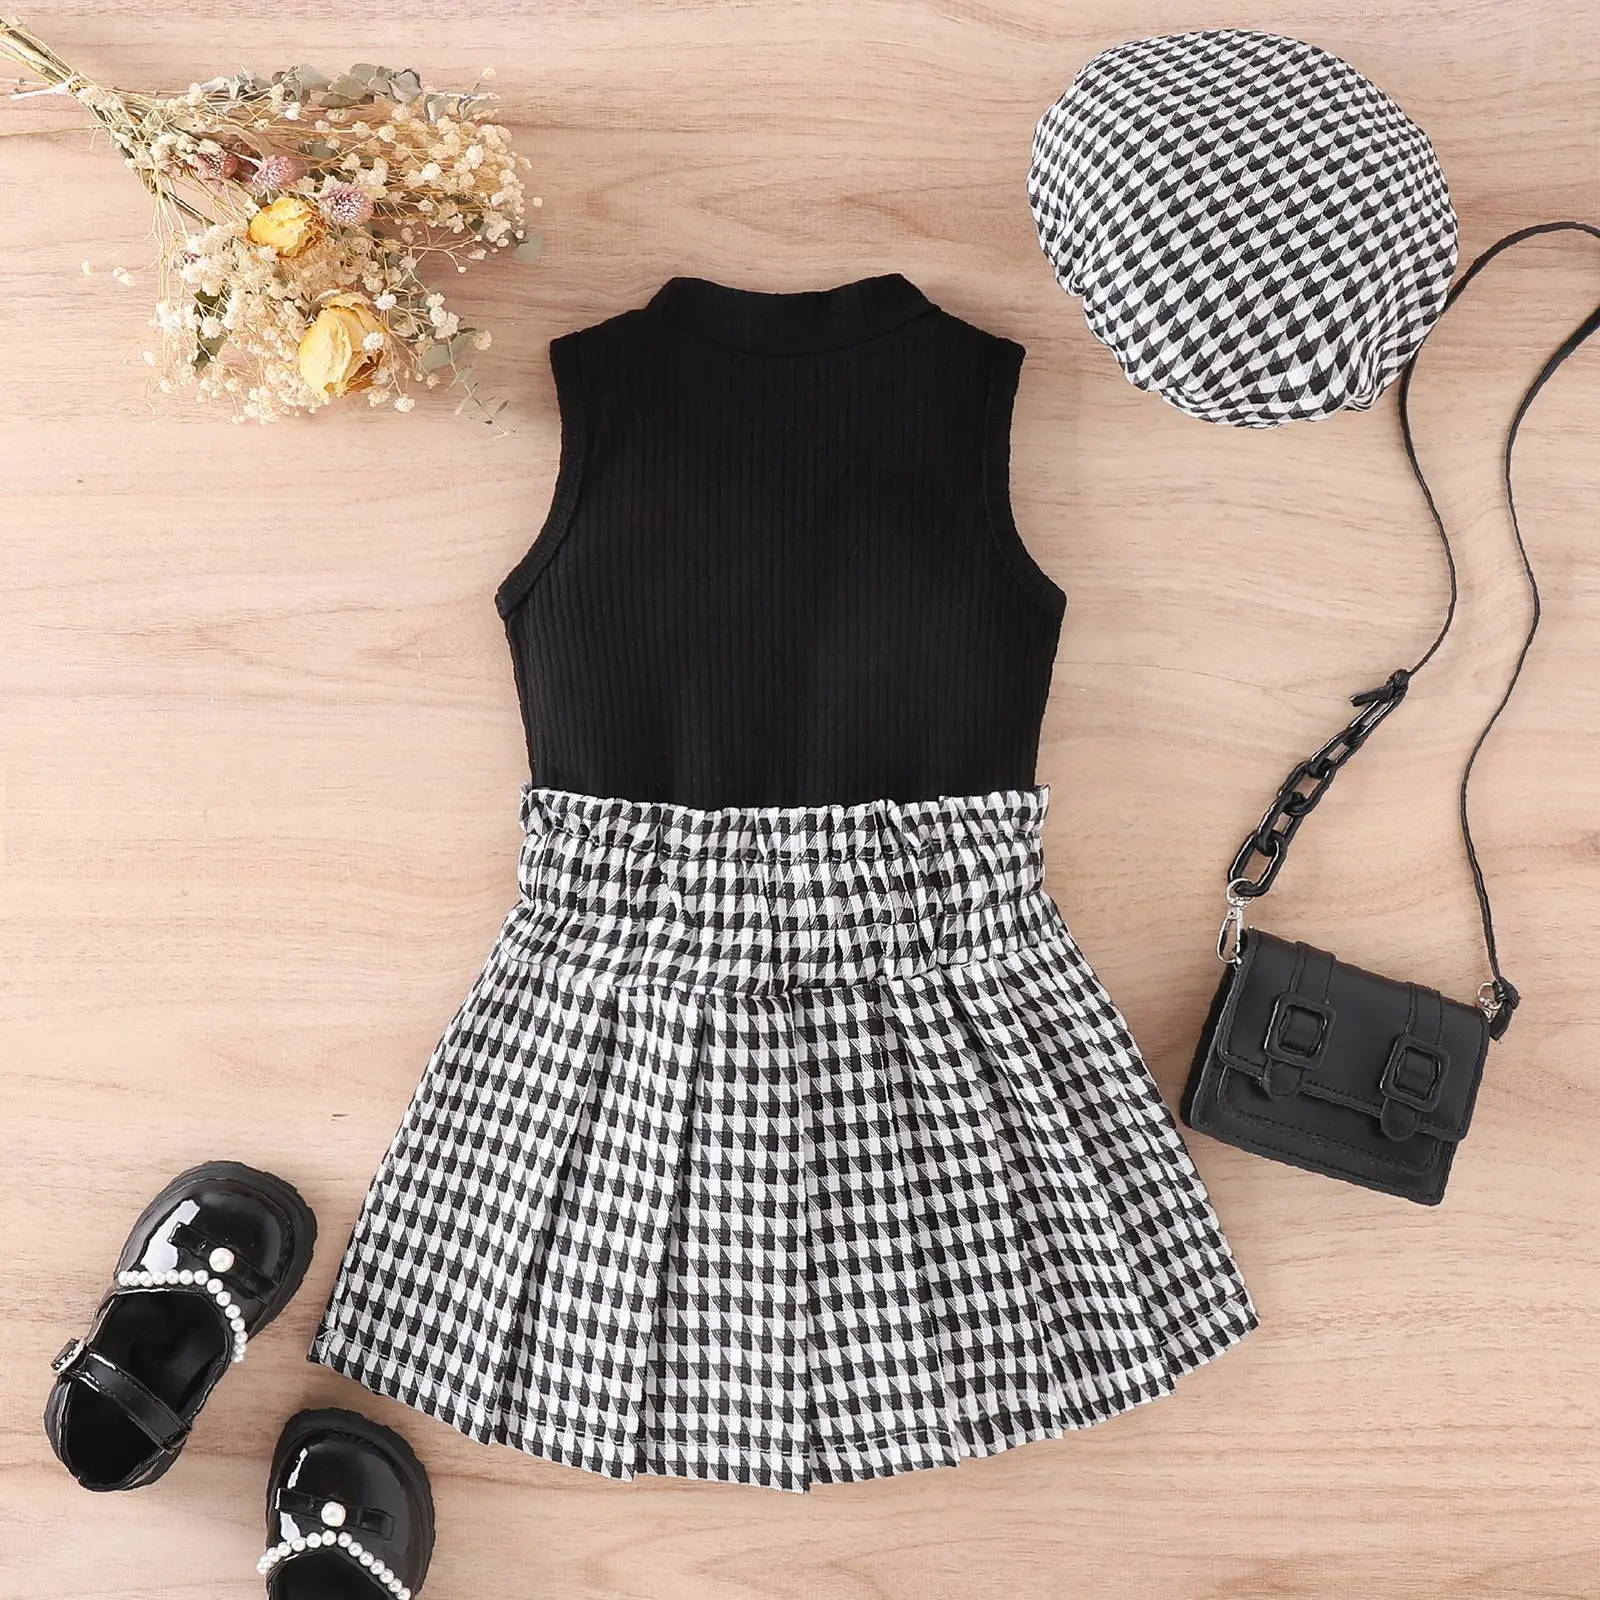 Spring Summer Children's clothing Cotton Pit Stripe Sleeveless Top Pearl Button Checkered Short Skirt Hat Girls Clothing Sets